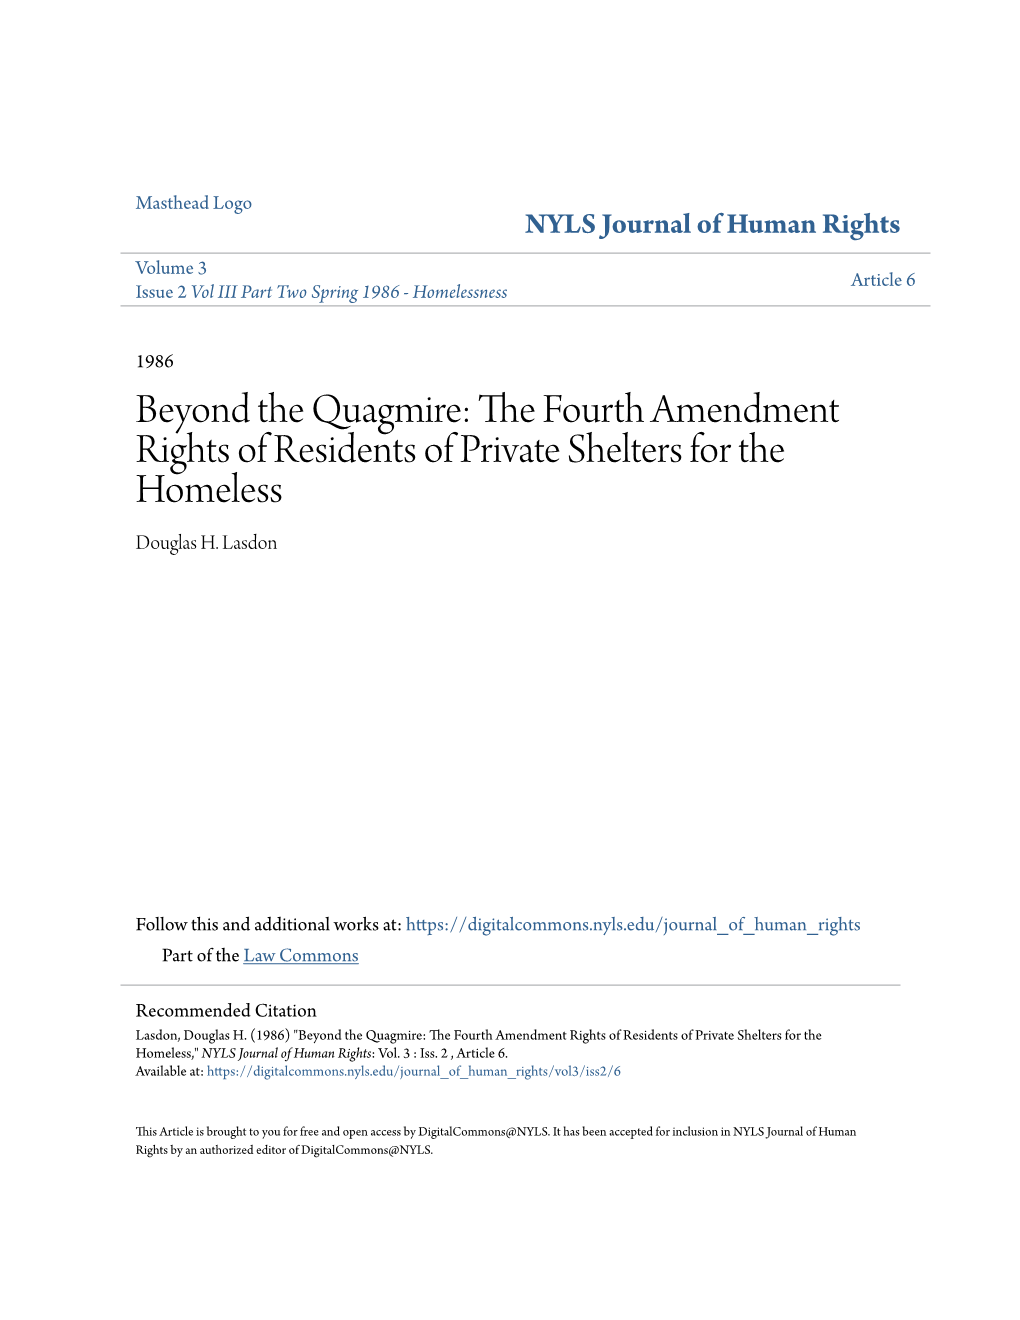 The Fourth Amendment Rights of Residents of Private Shelters for the Homeless